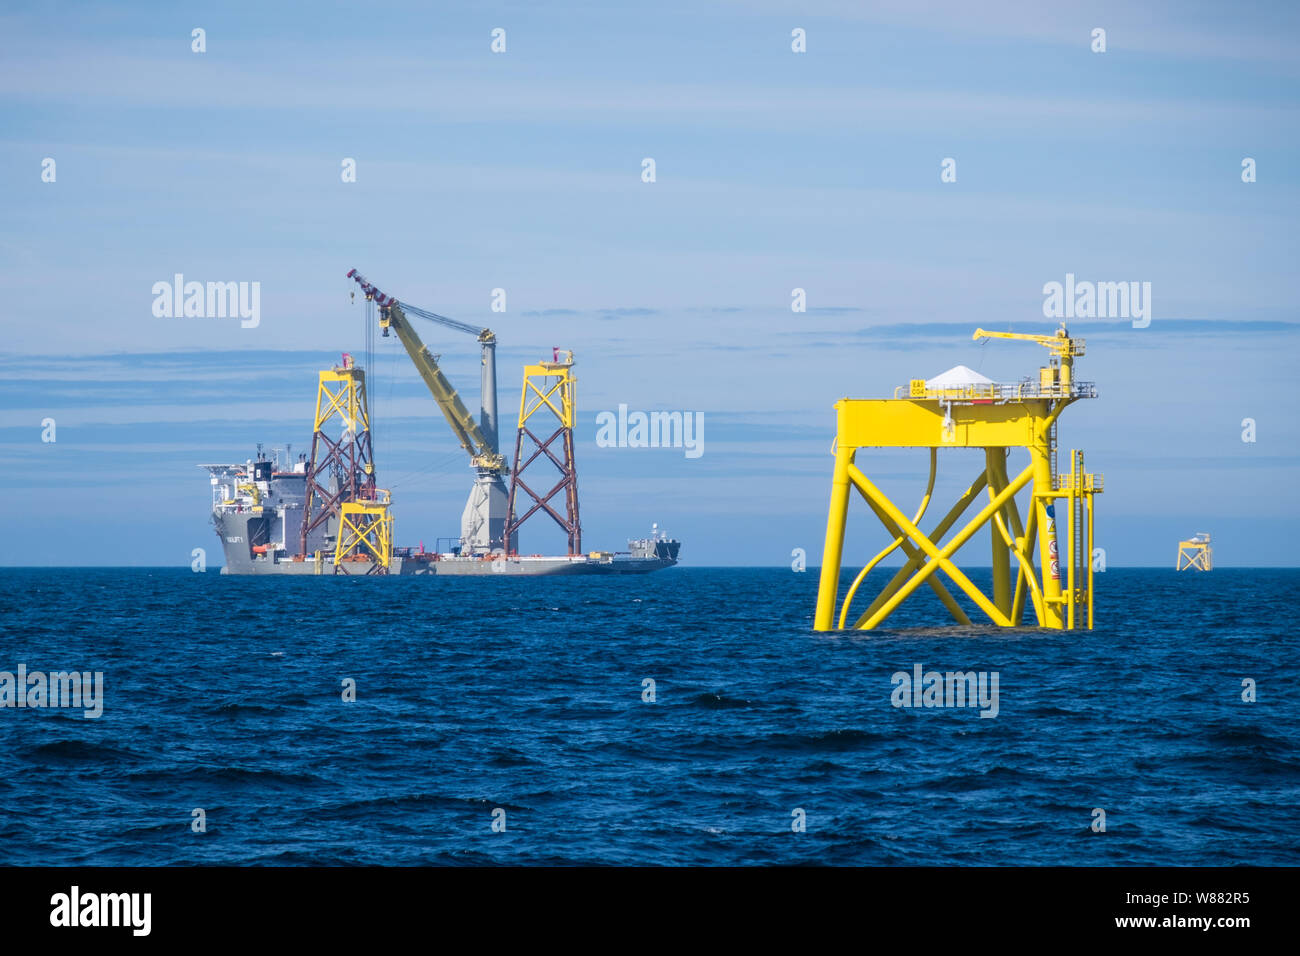 East Anglia ONE Offshore Wind Farm during construction with the heavy-lift construction vessel, Boka Lift, lifting one of the jackets in place Stock Photo